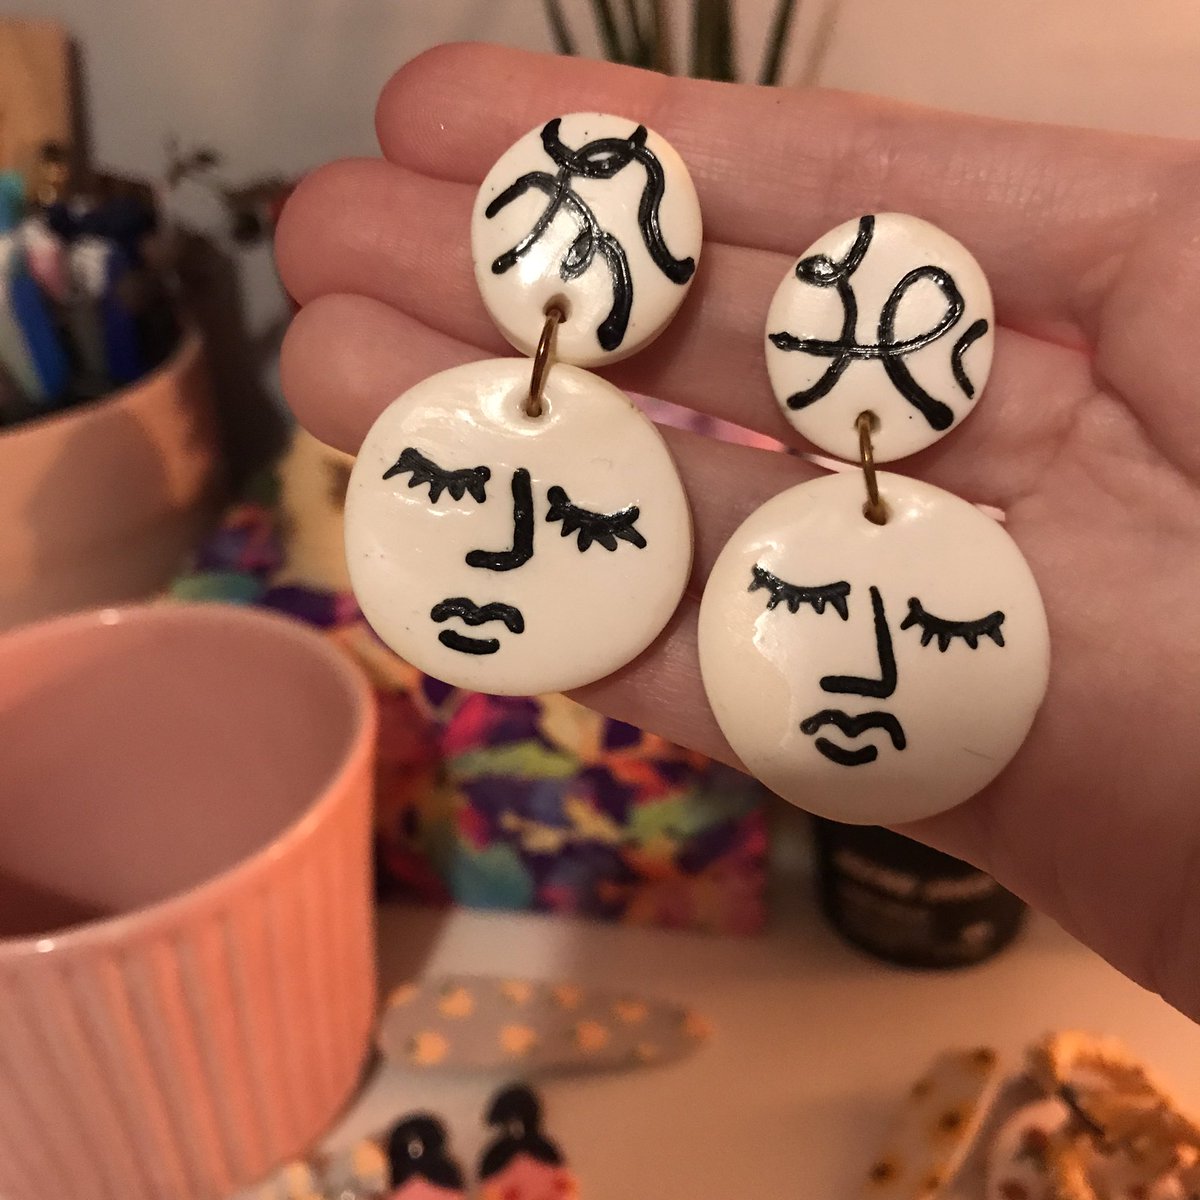 Some more abstract beauty! These are by PASTA Ceramics, I got the little studs for free (the maker is such a lovely lady!) I always get compliments on these black and white ones! She does other ceramic work as well:  http://p-a-s-t-a.com 